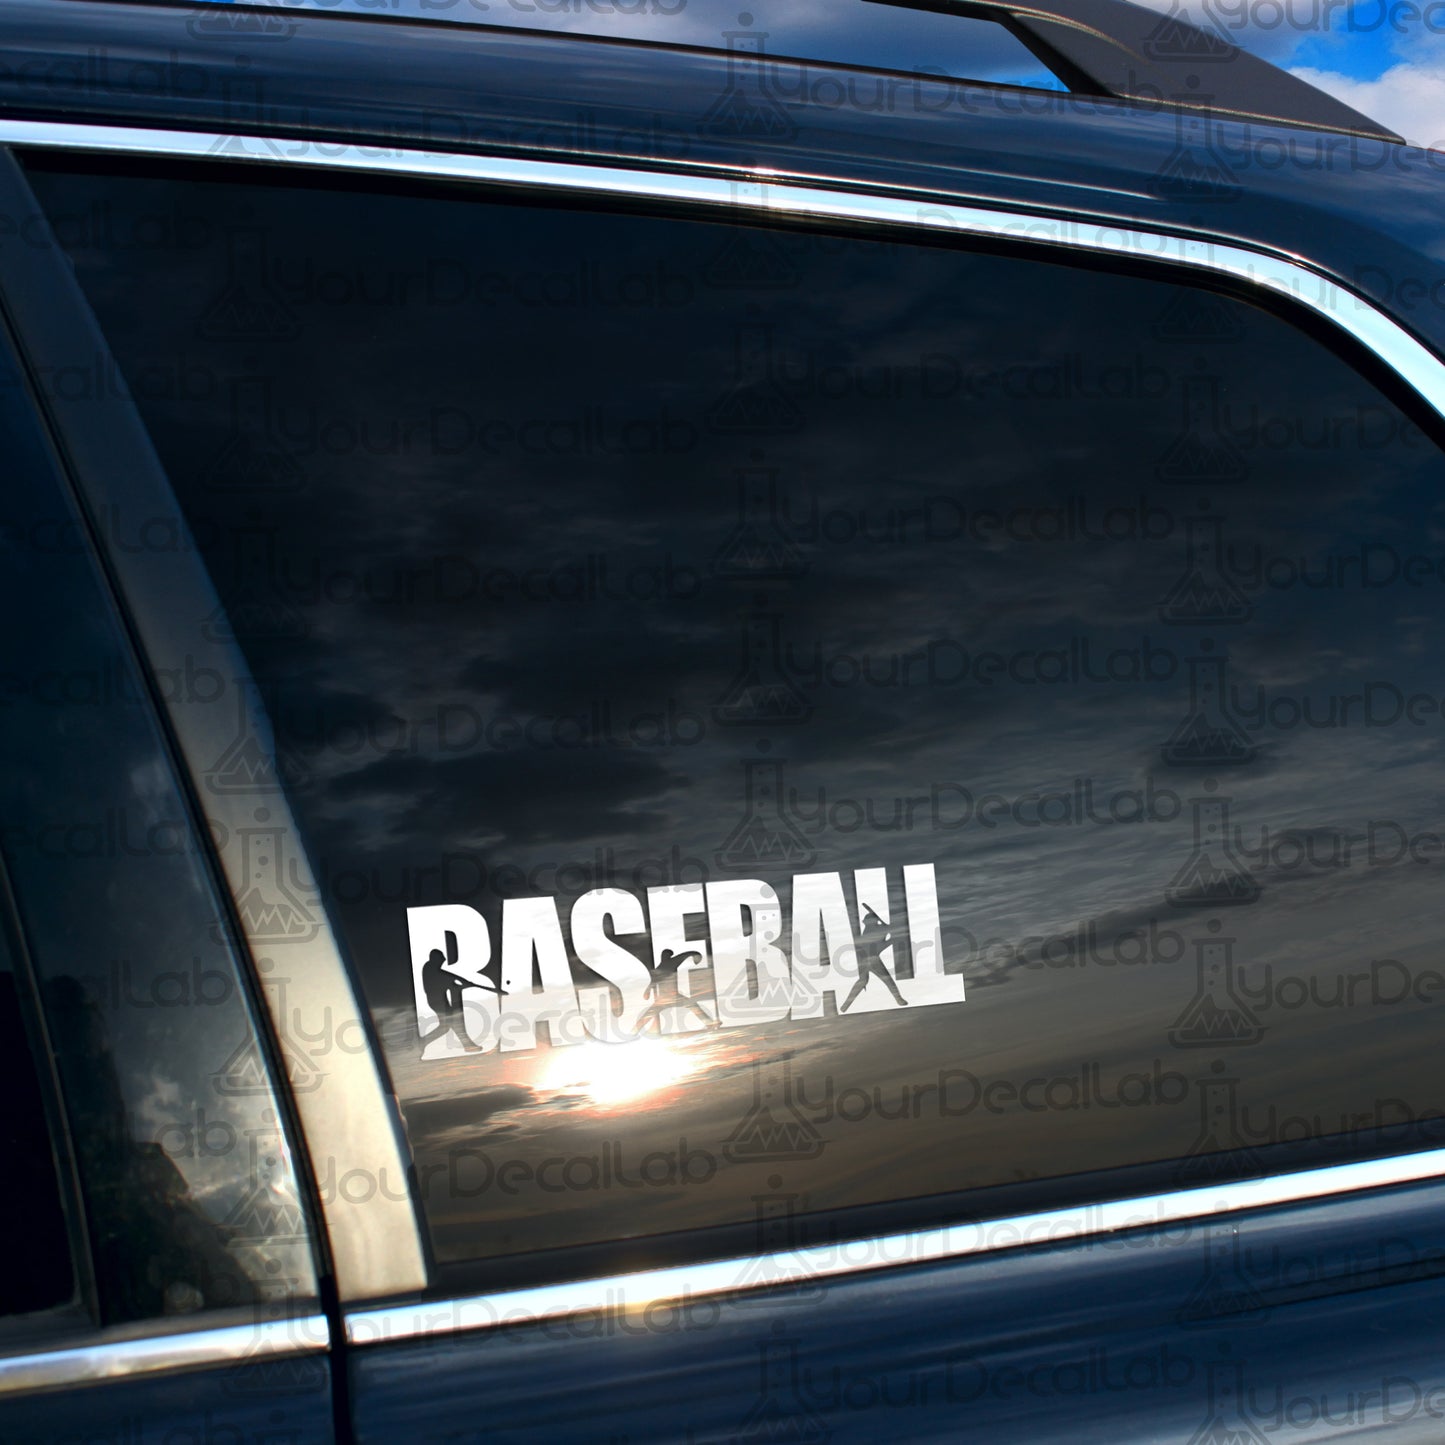 a close up of the word baseball on the side of a car